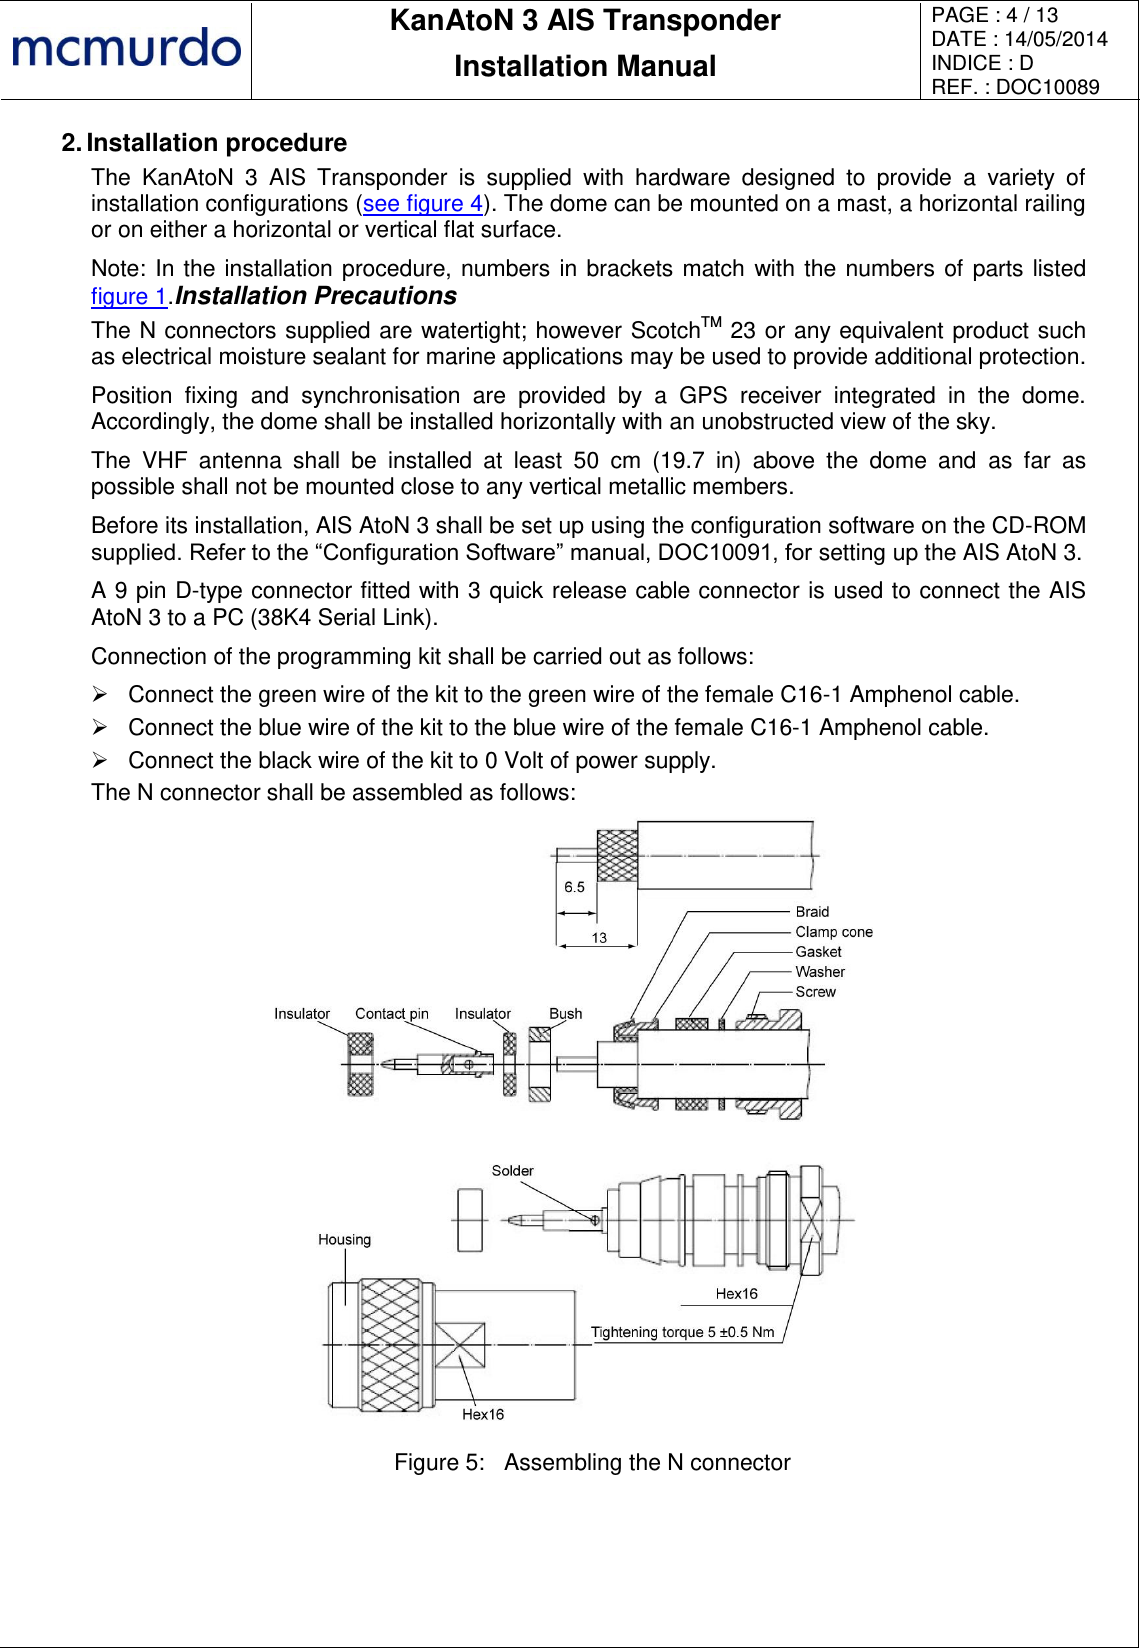       KanAtoN 3 AIS Transponder Installation Manual PAGE : 4 / 13 DATE : 14/05/2014 INDICE : D REF. : DOC10089   2. Installation procedure The  KanAtoN  3  AIS  Transponder  is  supplied  with  hardware  designed  to  provide  a  variety  of installation configurations (see figure 4). The dome can be mounted on a mast, a horizontal railing or on either a horizontal or vertical flat surface. Note: In the installation procedure, numbers in brackets match with the numbers of parts listed figure 1.Installation Precautions The N connectors supplied are watertight; however ScotchTM 23 or any equivalent product such as electrical moisture sealant for marine applications may be used to provide additional protection. Position  fixing  and  synchronisation  are  provided  by  a  GPS  receiver  integrated  in  the  dome. Accordingly, the dome shall be installed horizontally with an unobstructed view of the sky. The  VHF  antenna  shall  be  installed  at  least  50  cm  (19.7  in)  above  the  dome  and  as  far  as possible shall not be mounted close to any vertical metallic members. Before its installation, AIS AtoN 3 shall be set up using the configuration software on the CD-ROM supplied. Refer to the “Configuration Software” manual, DOC10091, for setting up the AIS AtoN 3. A 9 pin D-type connector fitted with 3 quick release cable connector is used to connect the AIS AtoN 3 to a PC (38K4 Serial Link). Connection of the programming kit shall be carried out as follows:   Connect the green wire of the kit to the green wire of the female C16-1 Amphenol cable.   Connect the blue wire of the kit to the blue wire of the female C16-1 Amphenol cable.   Connect the black wire of the kit to 0 Volt of power supply. The N connector shall be assembled as follows:  Figure 5:  Assembling the N connector 